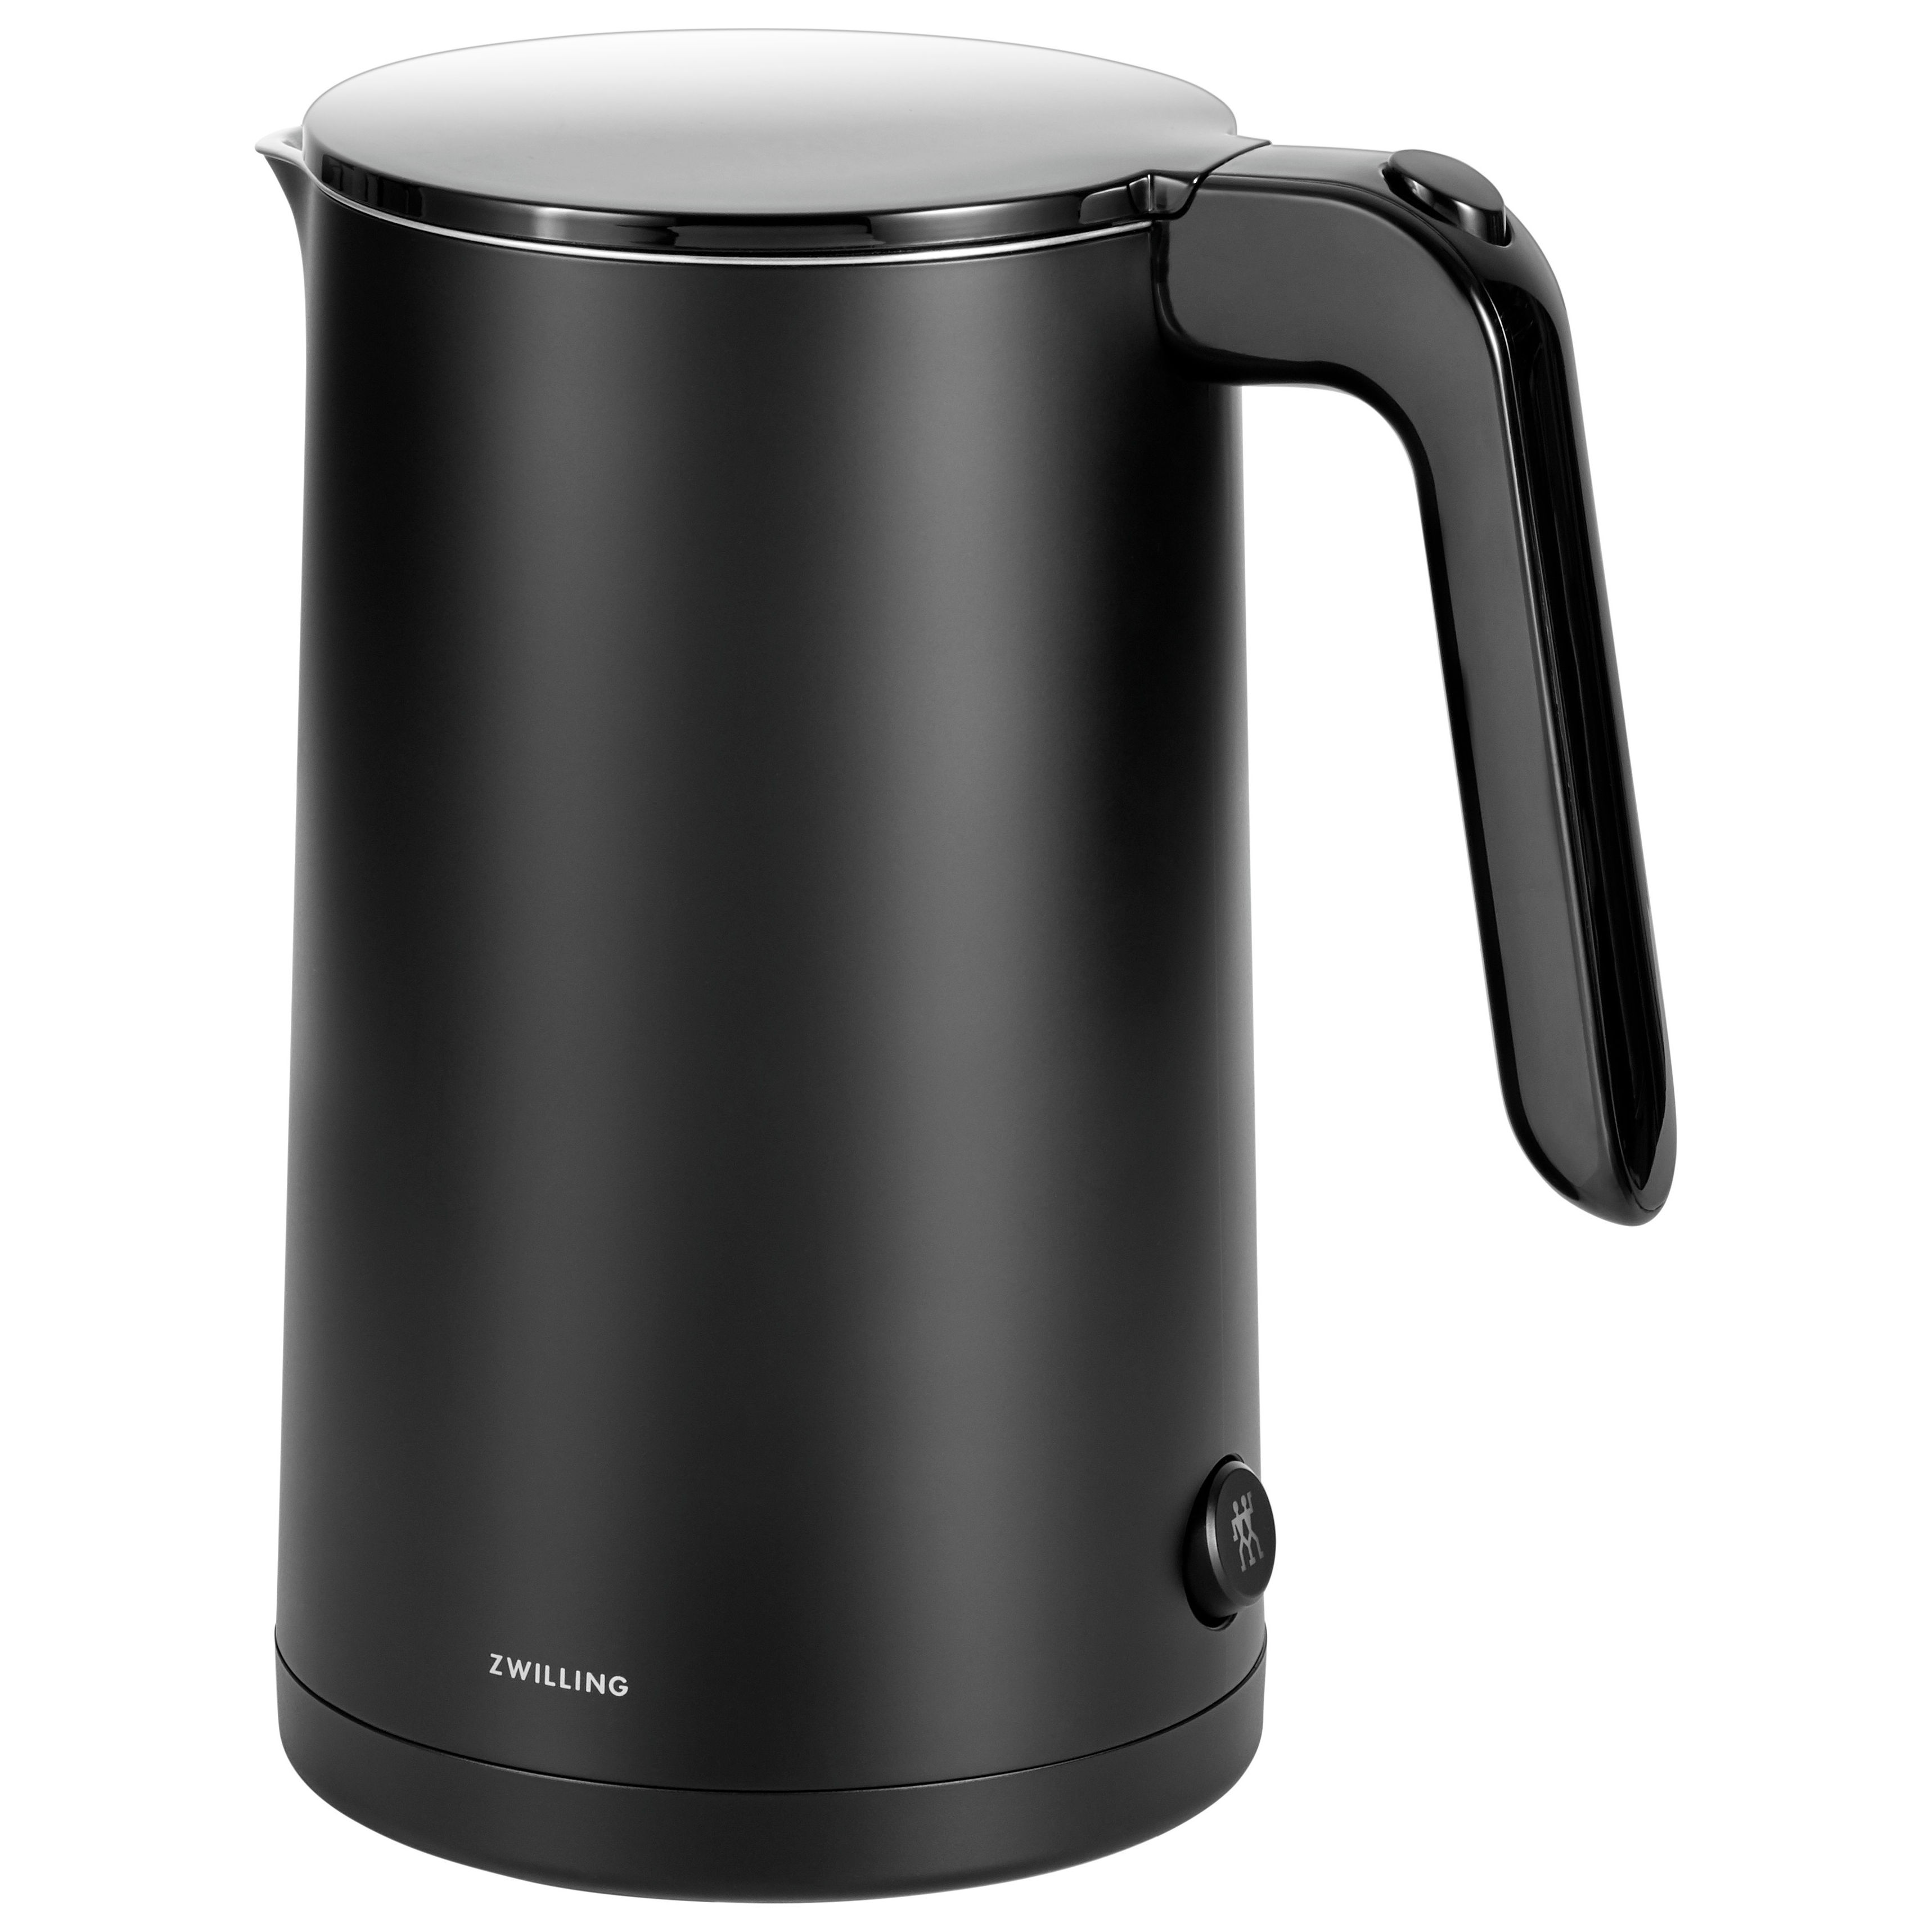 BELLA 1.5L Electric Ceramic Kettle, Silver - household items - by